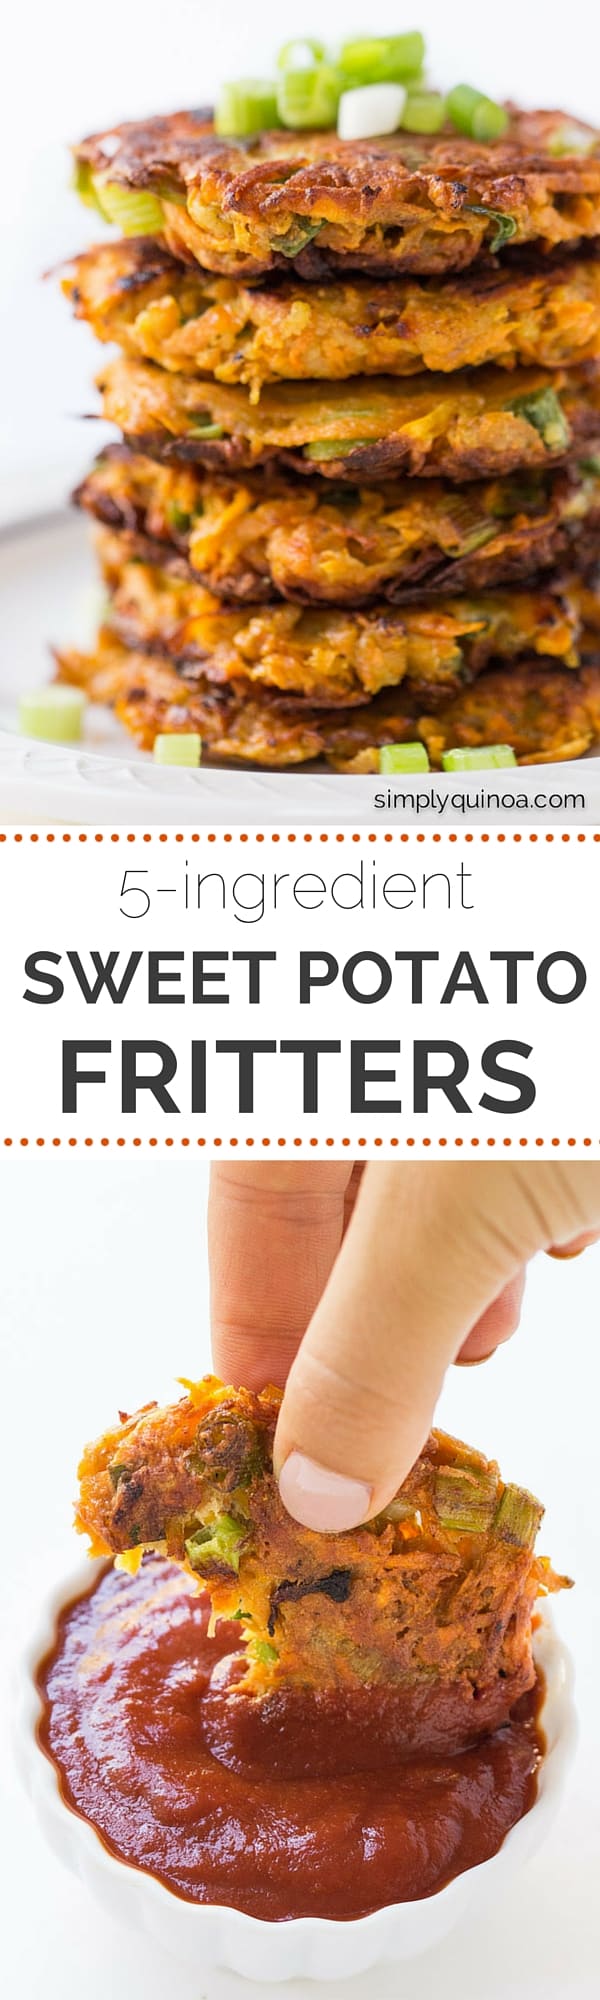 5-ingredient Sweet Potato Quinoa Fritters - a simple, fast and delicious side dish sauteed with coconut oil | recipe on simplyquinoa.com